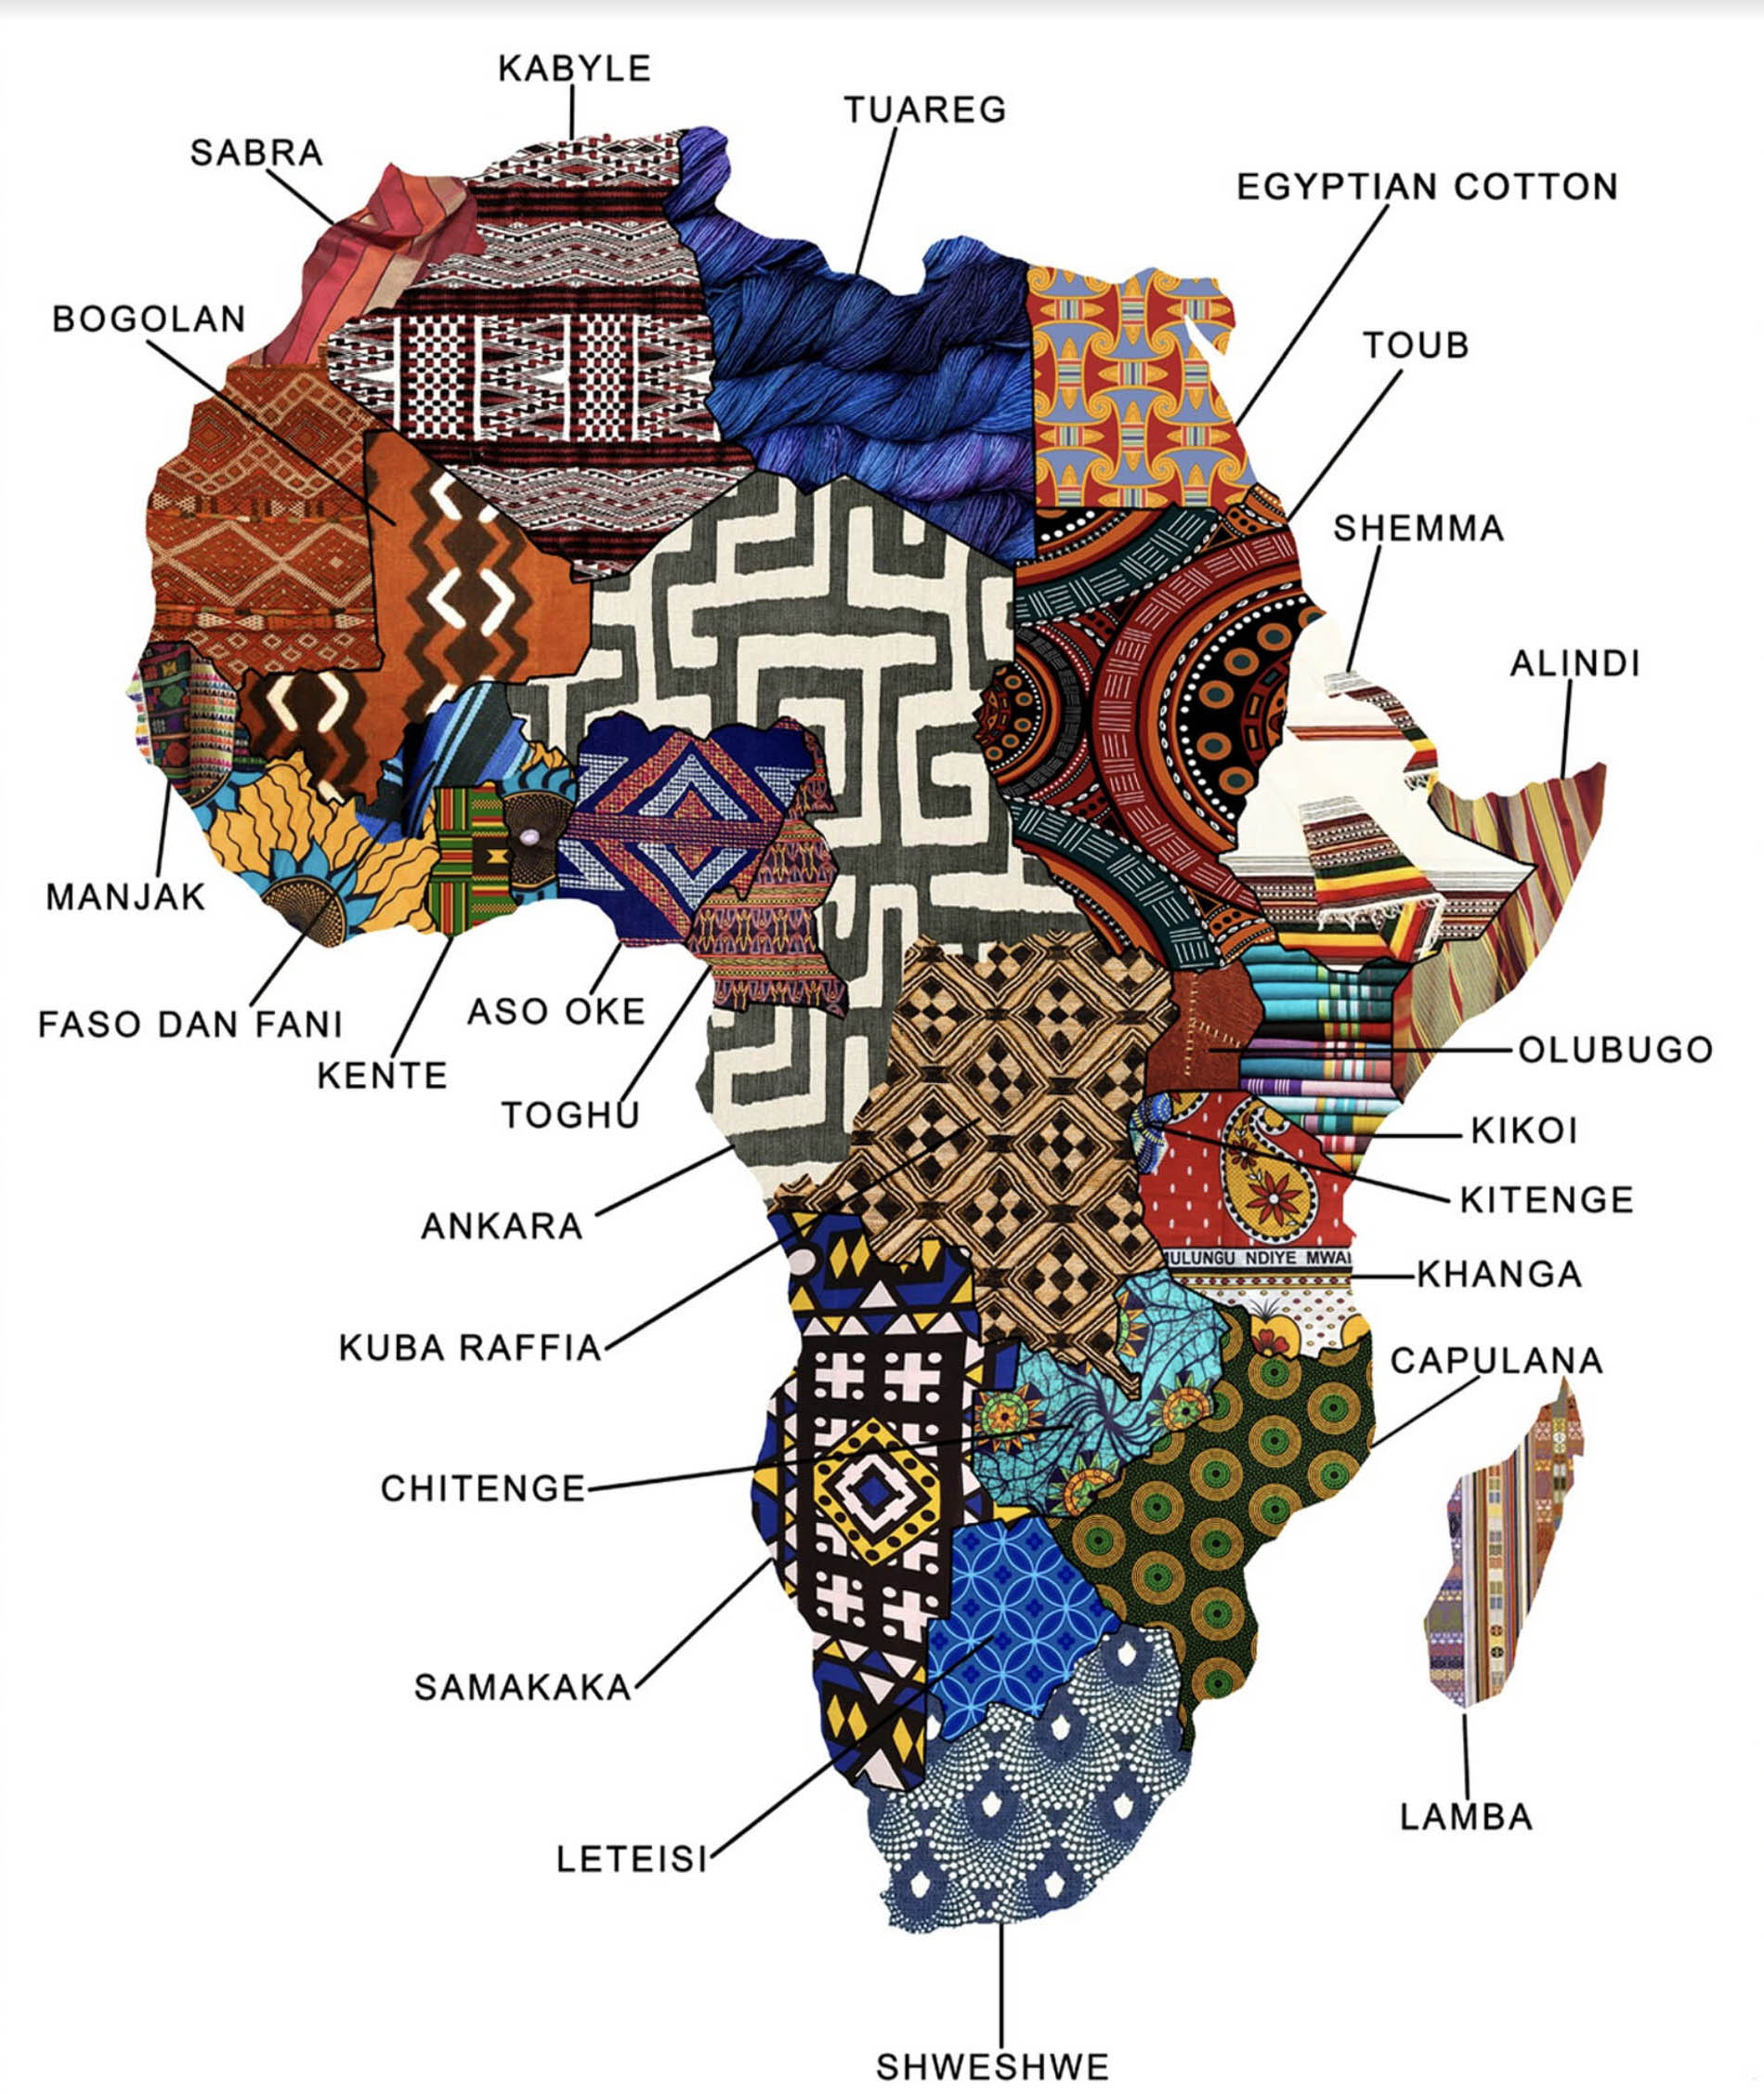 Fabric map of Africa by Priya Shah for Africatown Plaza in Seattle, Wa.